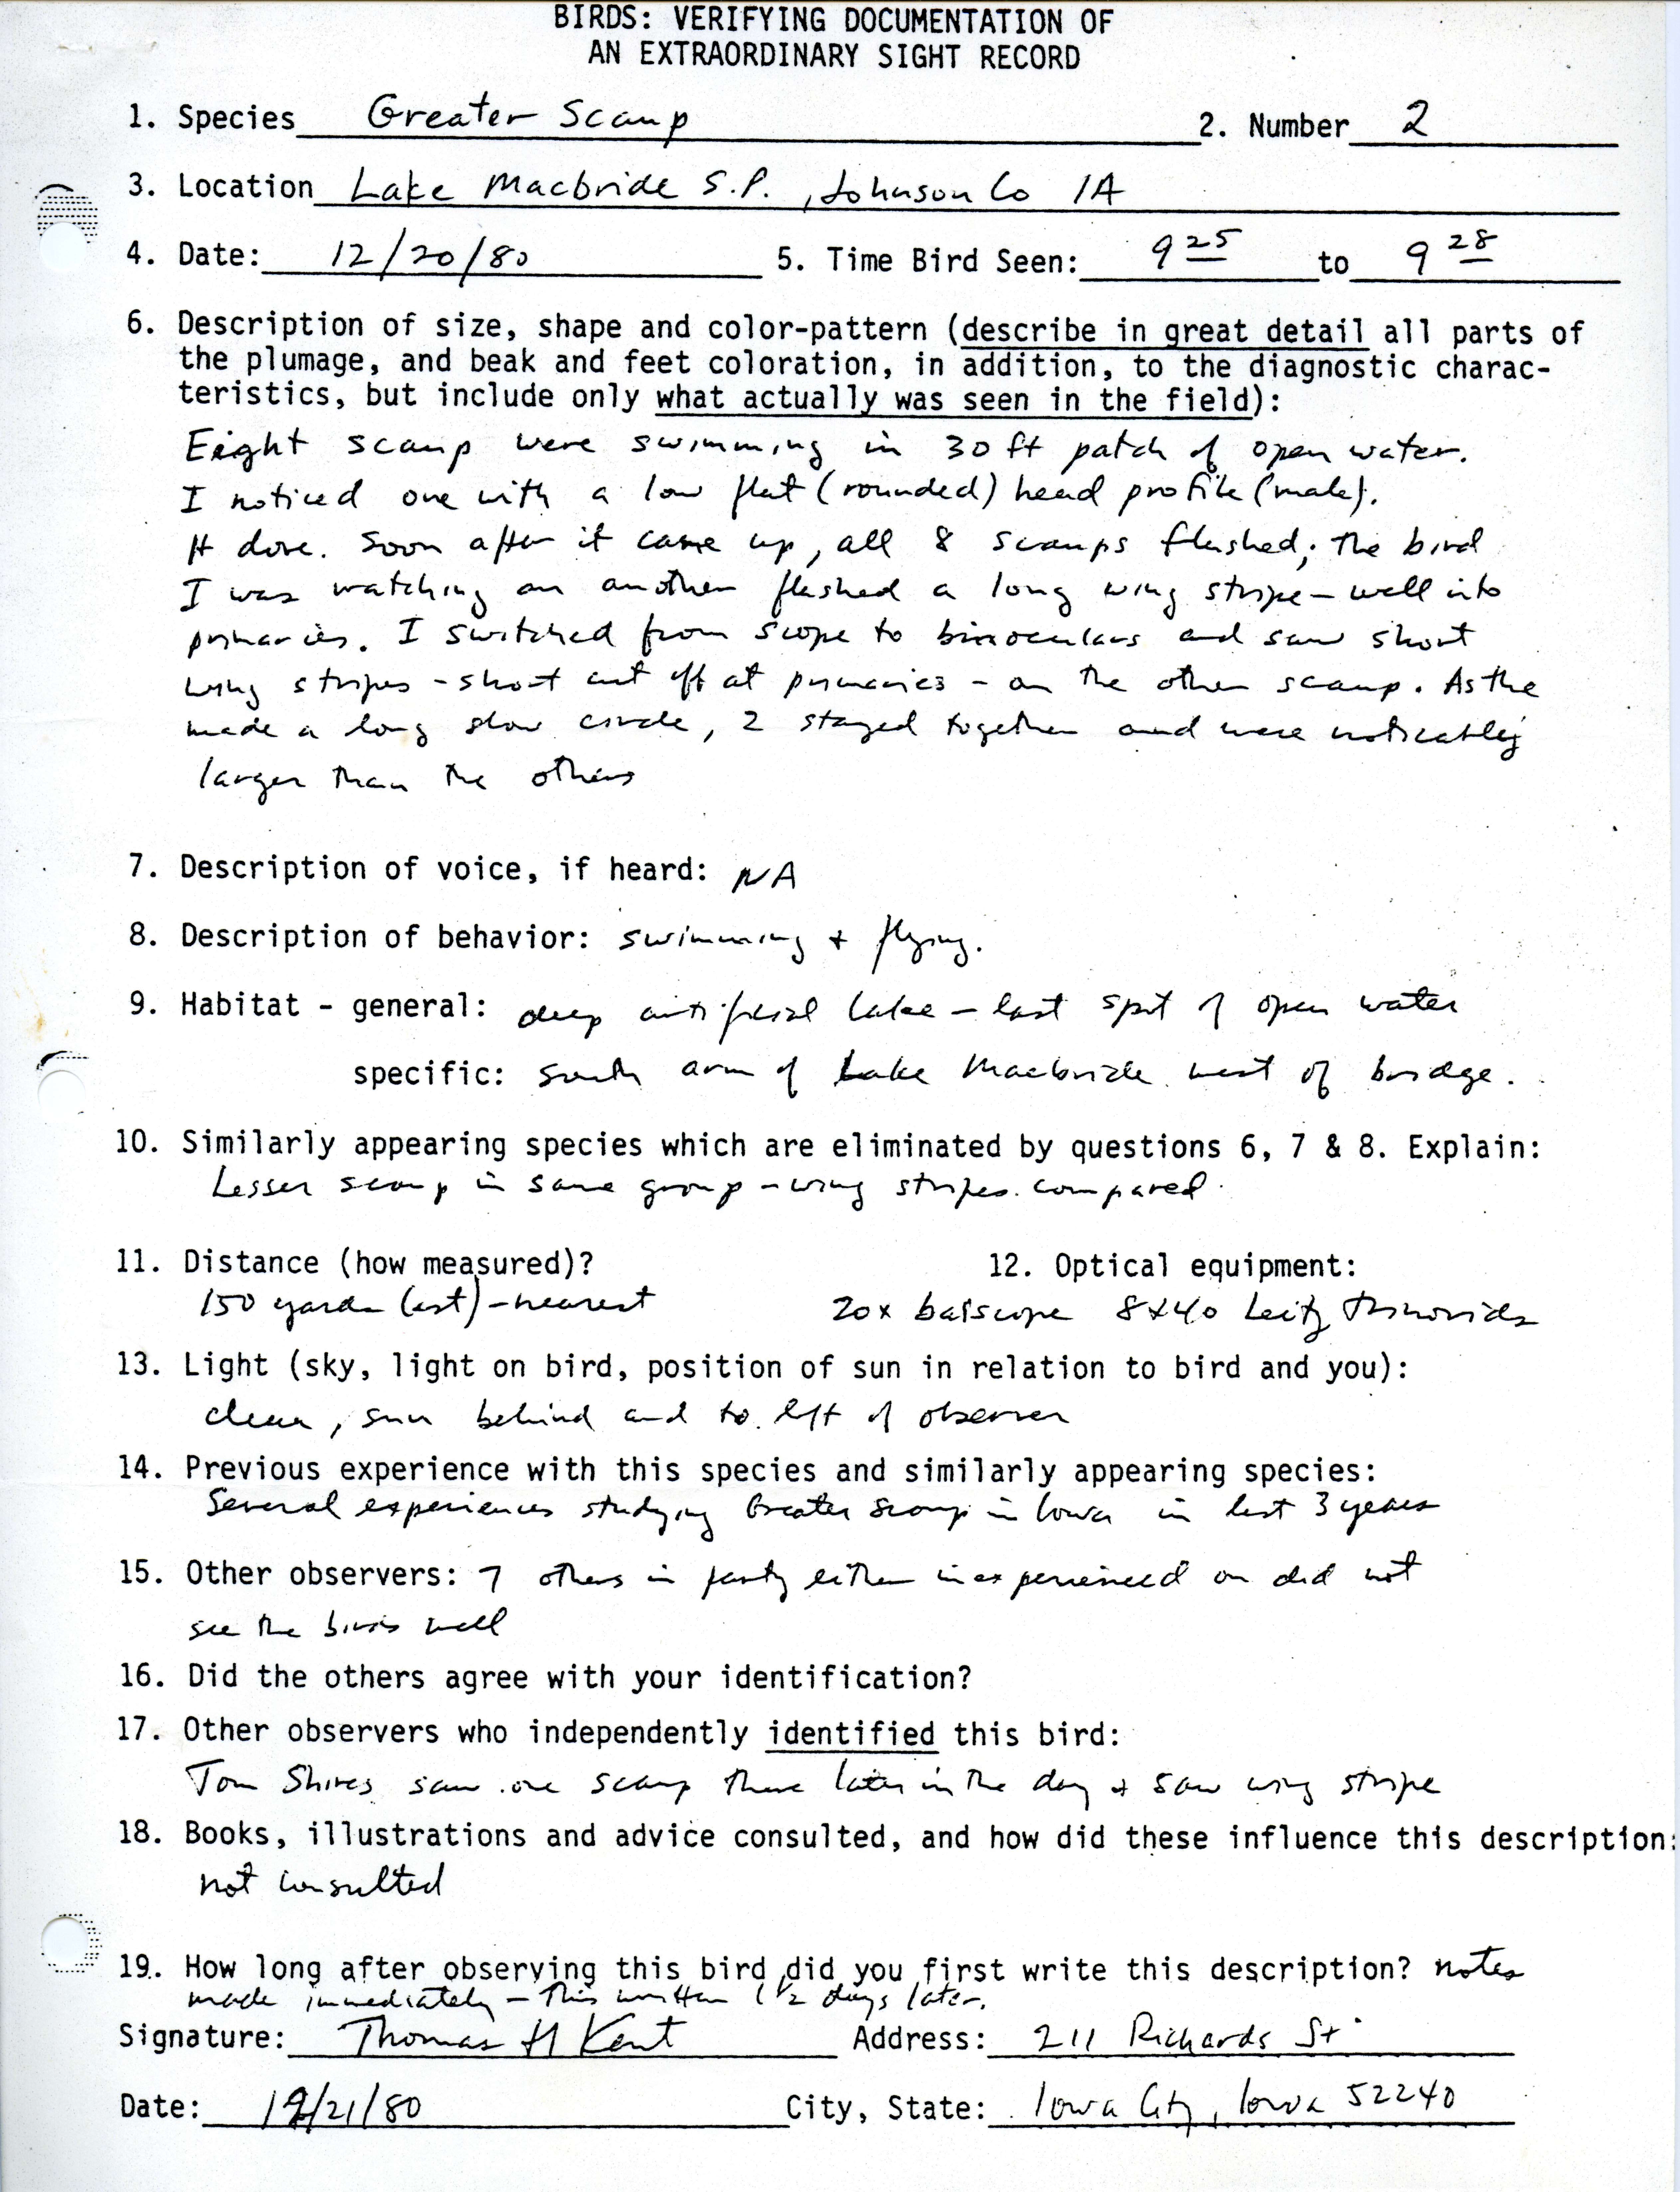 Verifying documentation form for Greater Scaup sighting submitted by Thomas H. Kent, December 20 1980